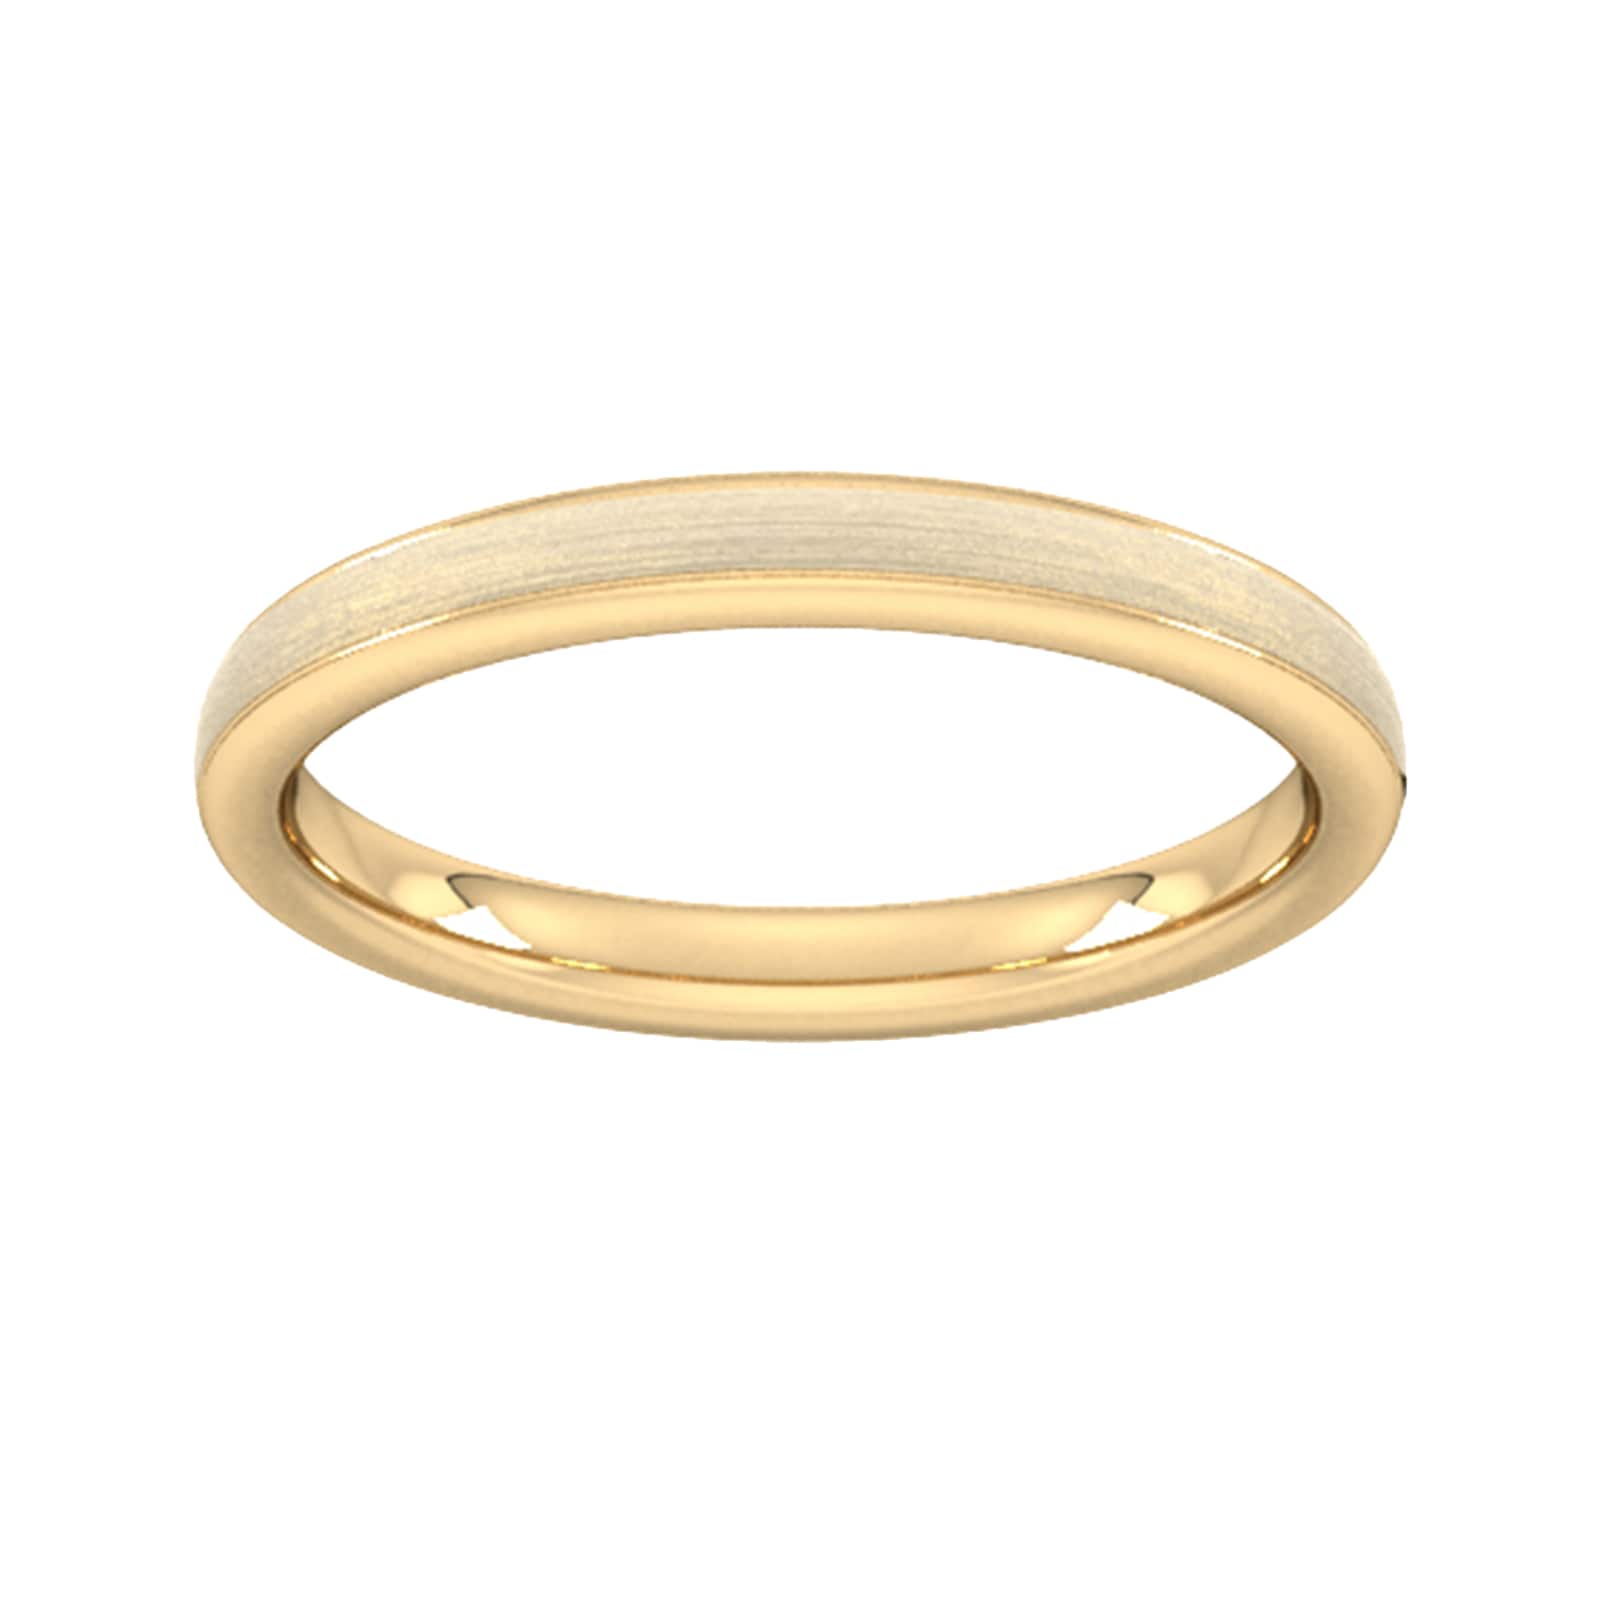 2.5mm Flat Court Heavy Matt Centre With Grooves Wedding Ring In 18 Carat Yellow Gold - Ring Size G